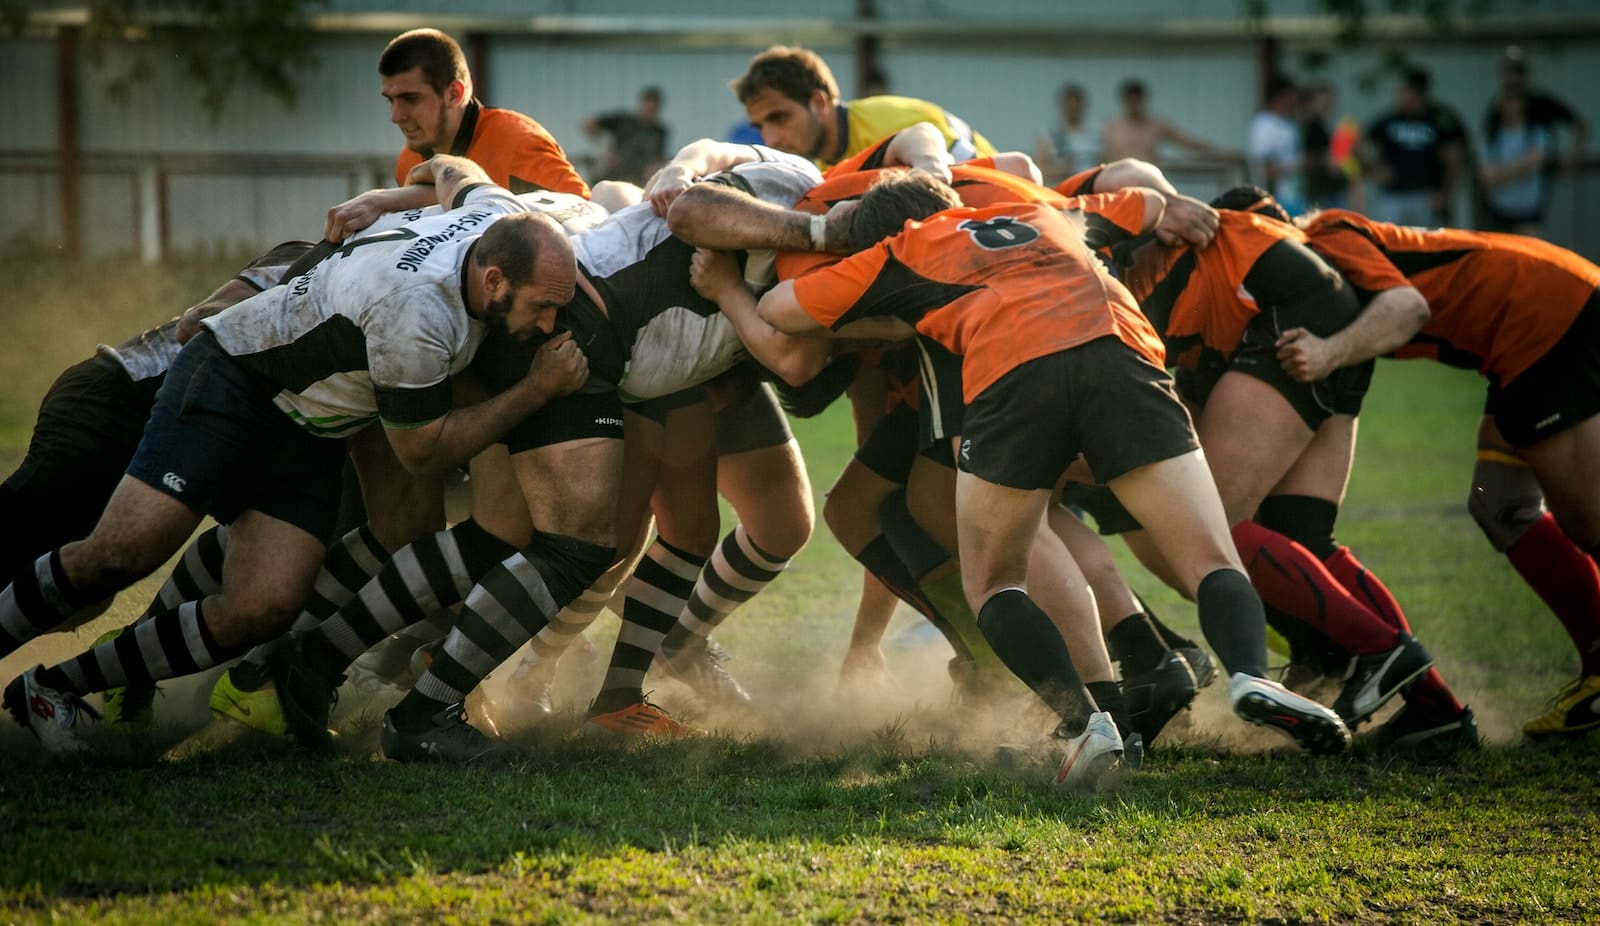 How to prevent injuries in Rugby?